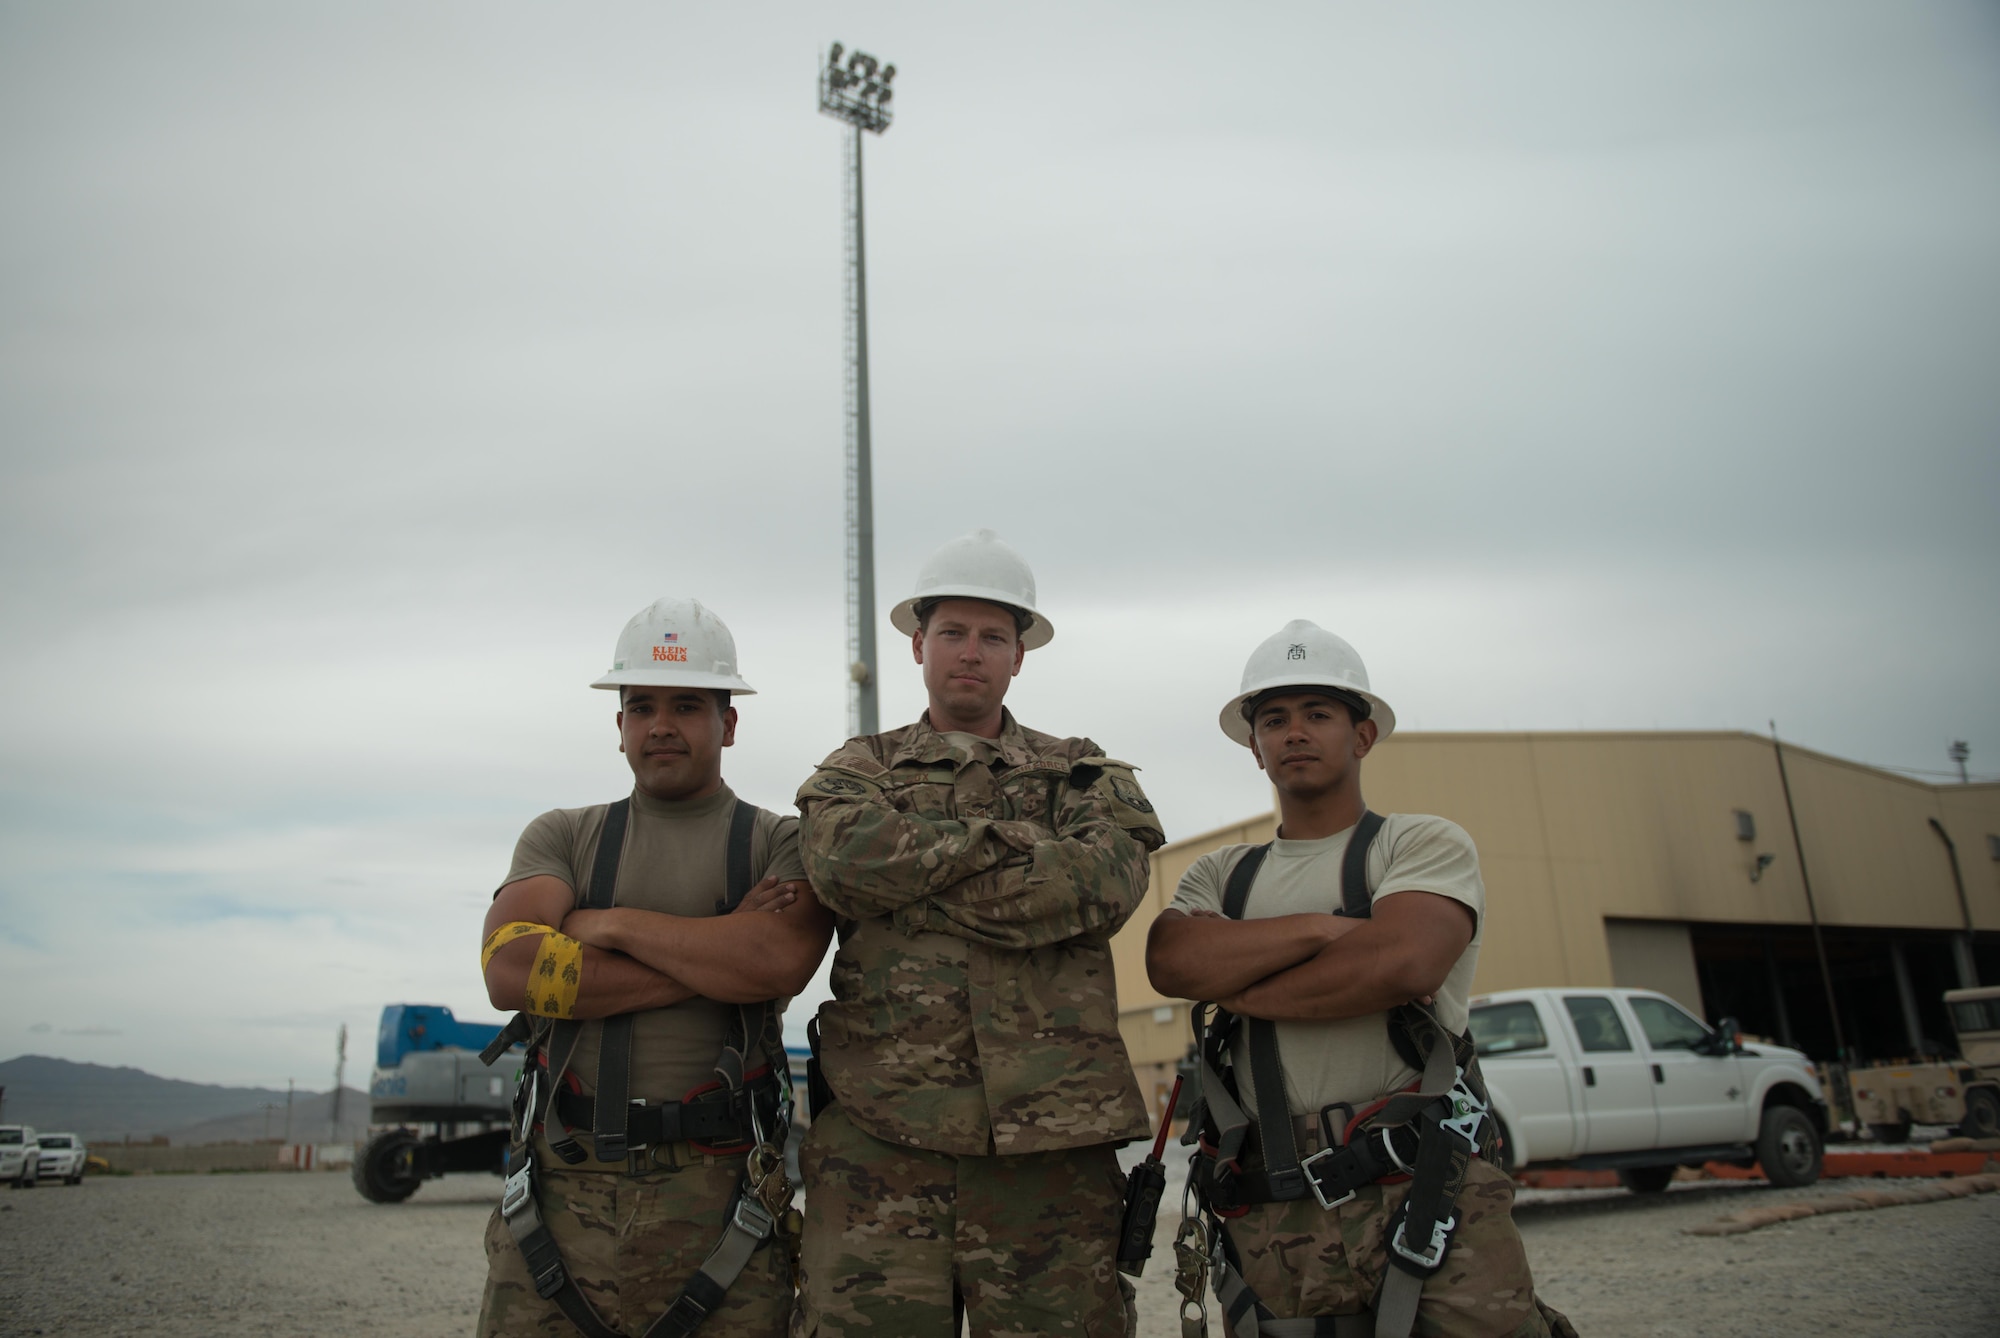 Airmen from the 455th Expeditionary Civil Engineer Squadron pose for a photo at Bagram Airfield, Afghanistan, May 12, 2017. Civil Engineers work on systems that require them to go up to great heights, requiring multiple safety measures to minimize the risk of injury. Other than personal protective equipment like gloves and hard hats, engineers must wear a harness in case they fall. While falls are the leading cause of injuries in the U.S. Air Force, proper education, risk management and proactive supervision have been major in lowering these types of injuries. (U.S. Air Force photo by Staff Sgt. Benjamin Gonsier)